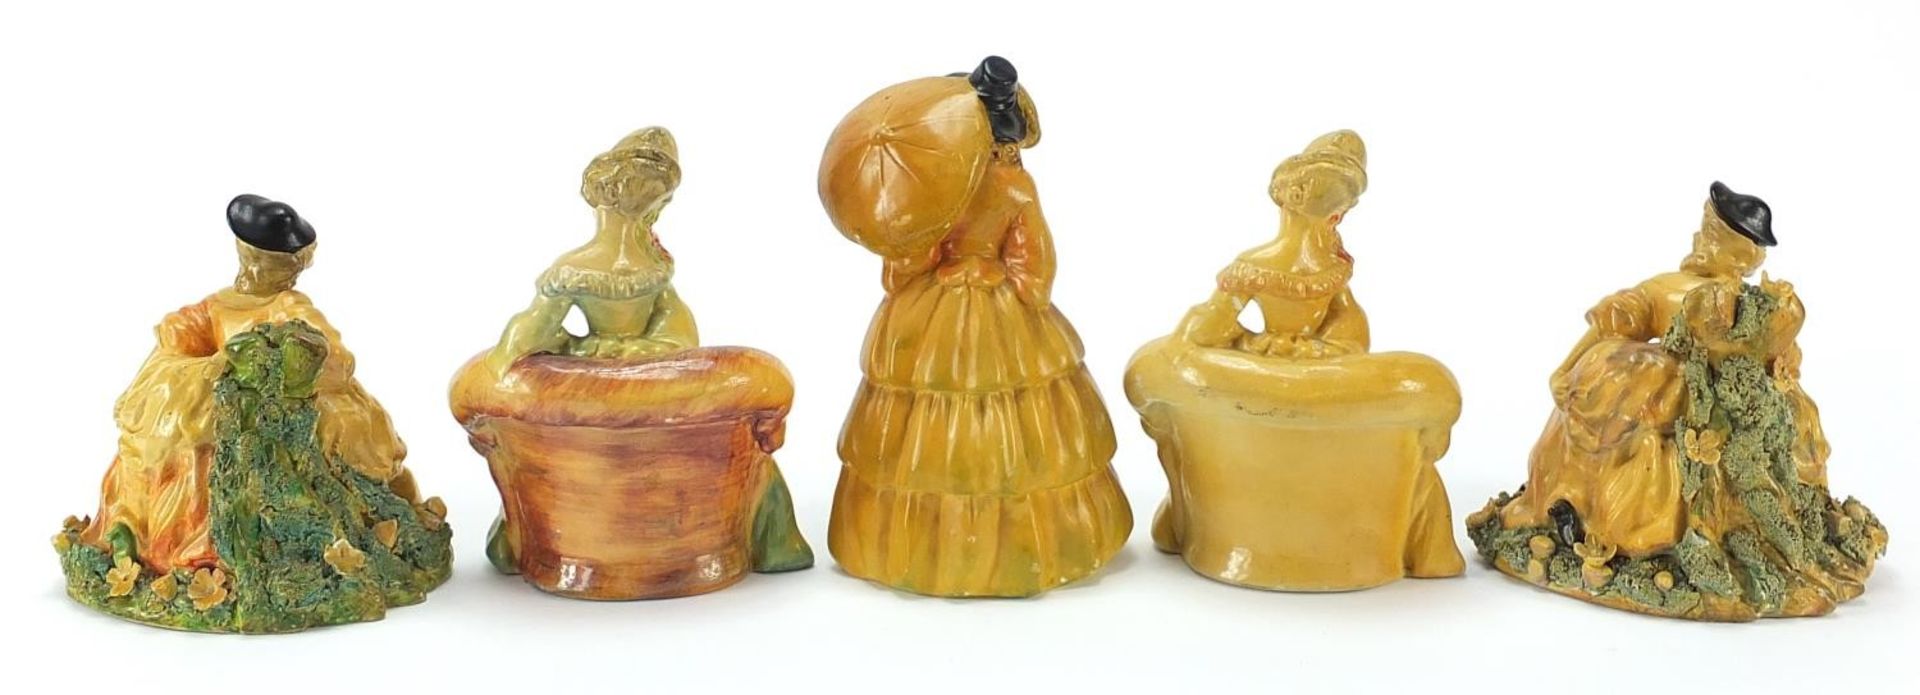 Five Wade cellulose figurines, the largest 16.5cm high - Image 4 of 6